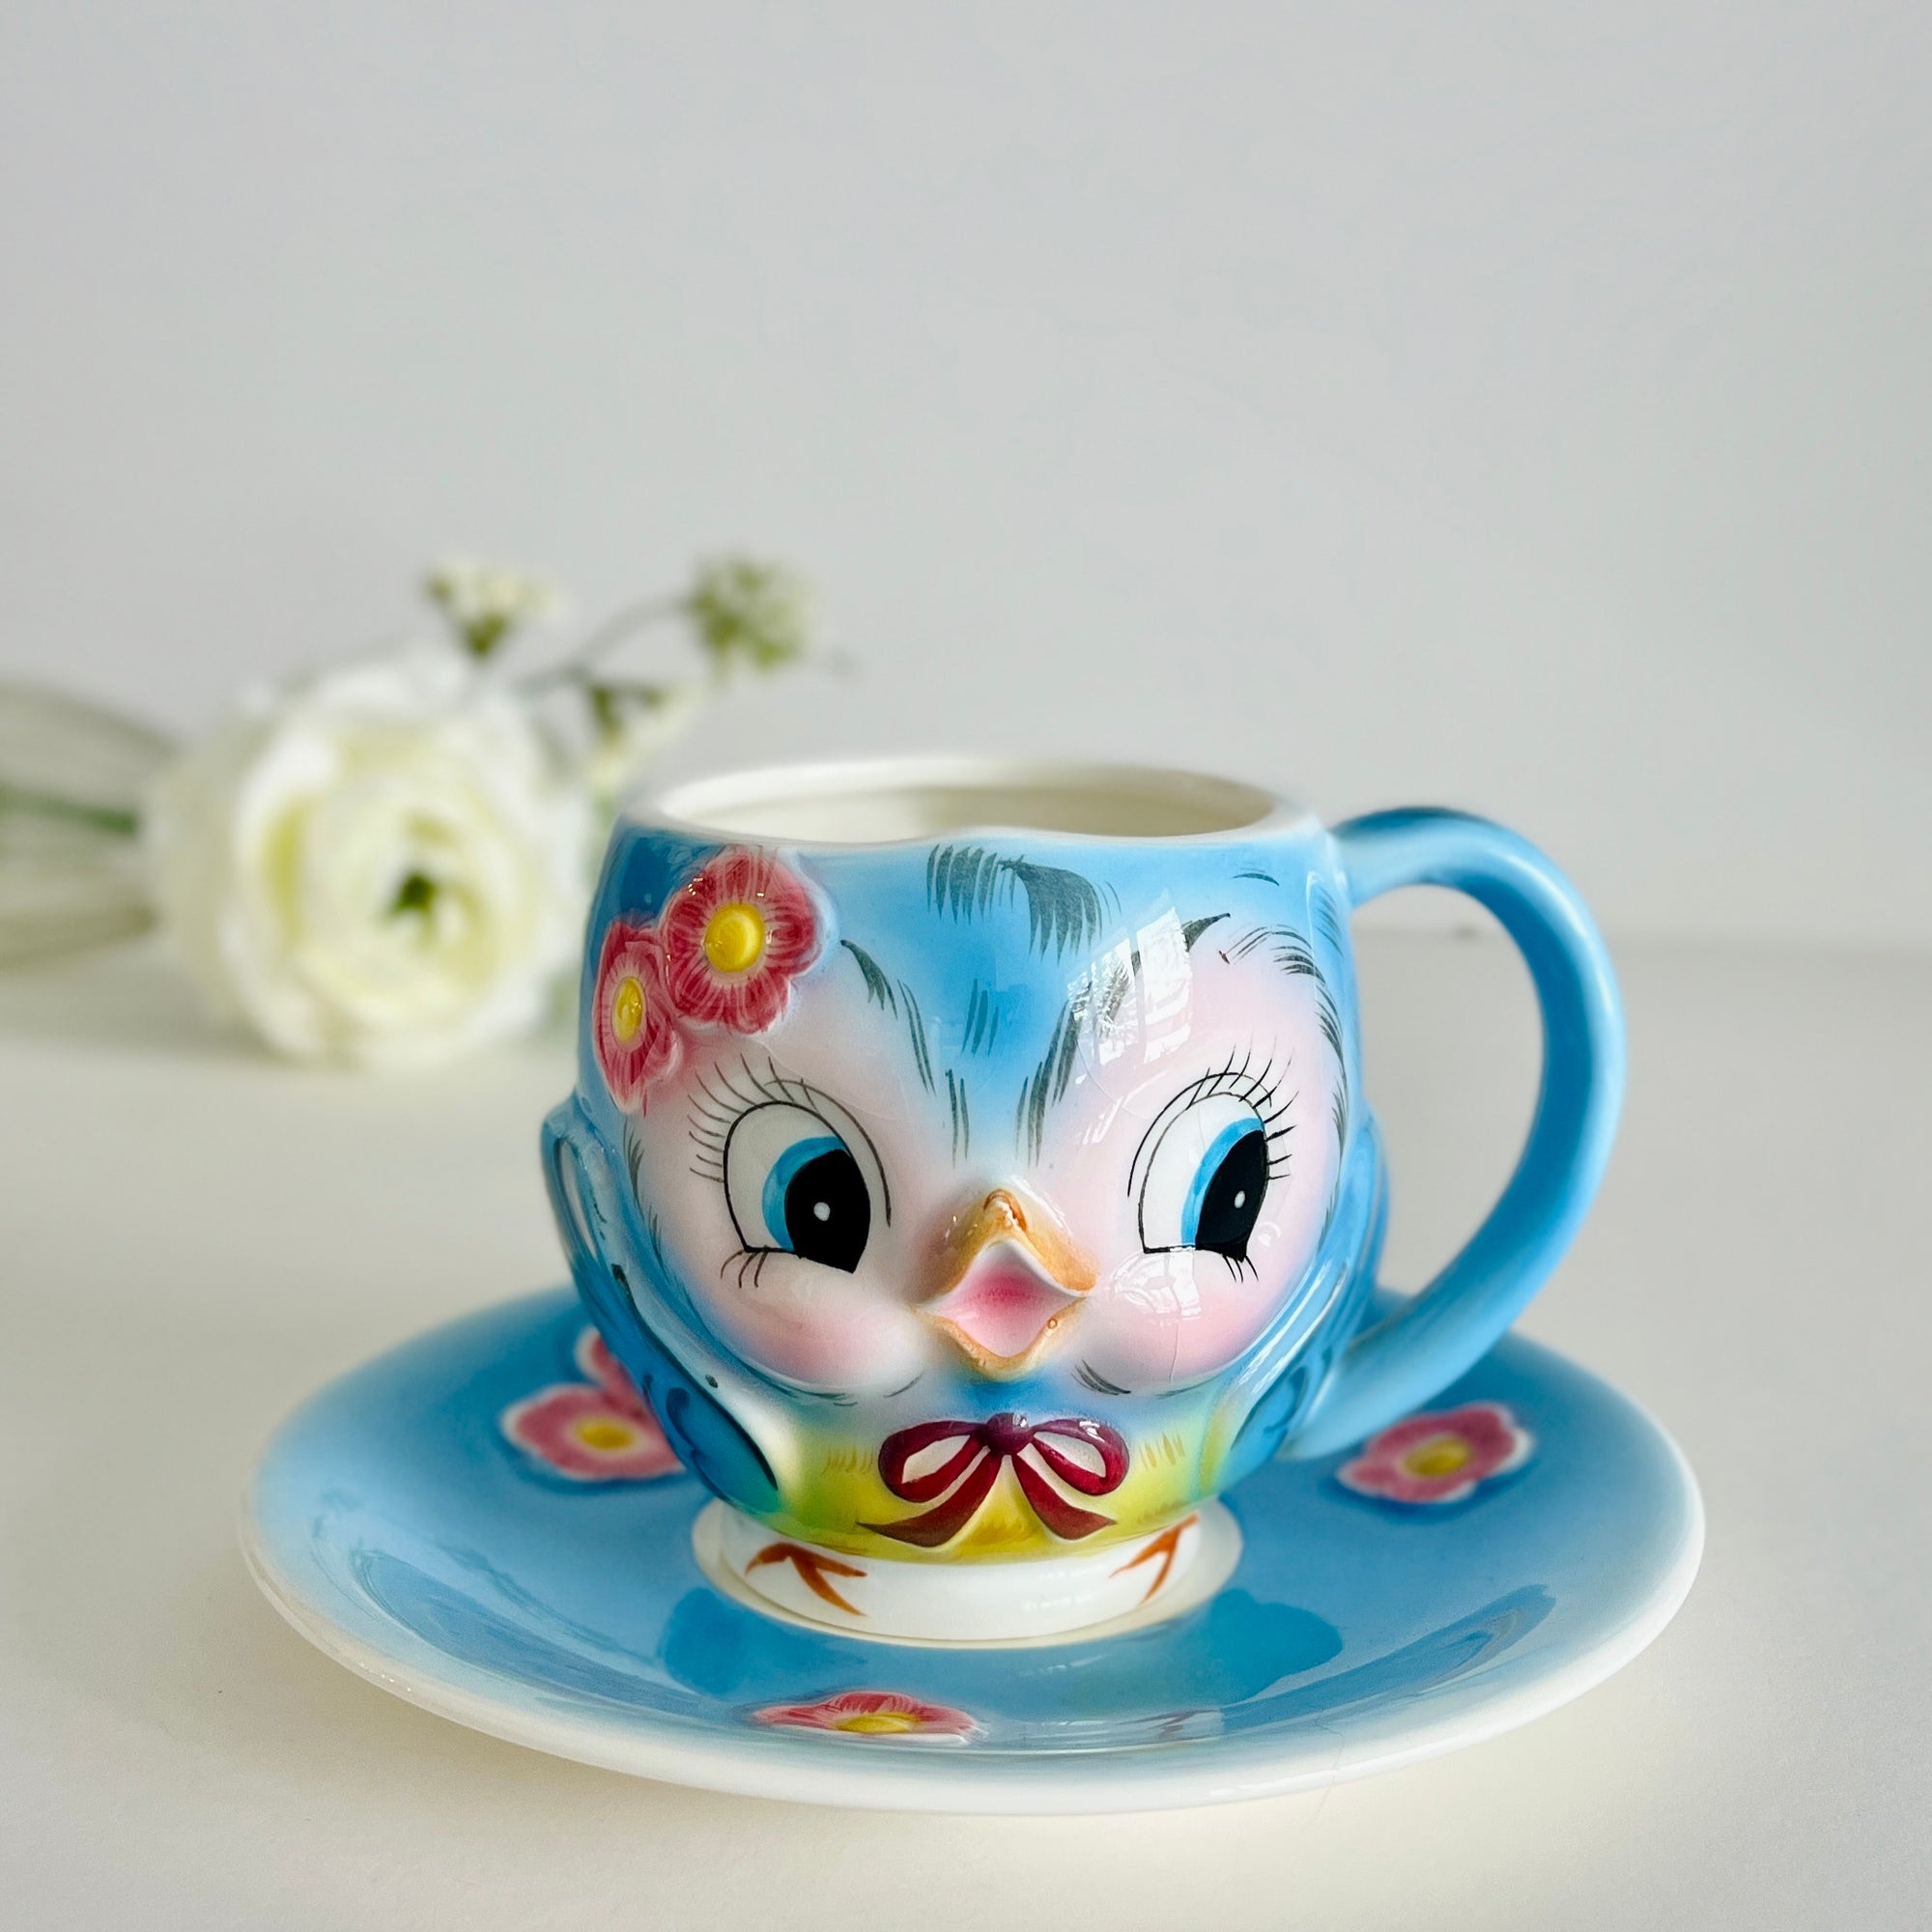 Lefton ESD Teacup and Saucer